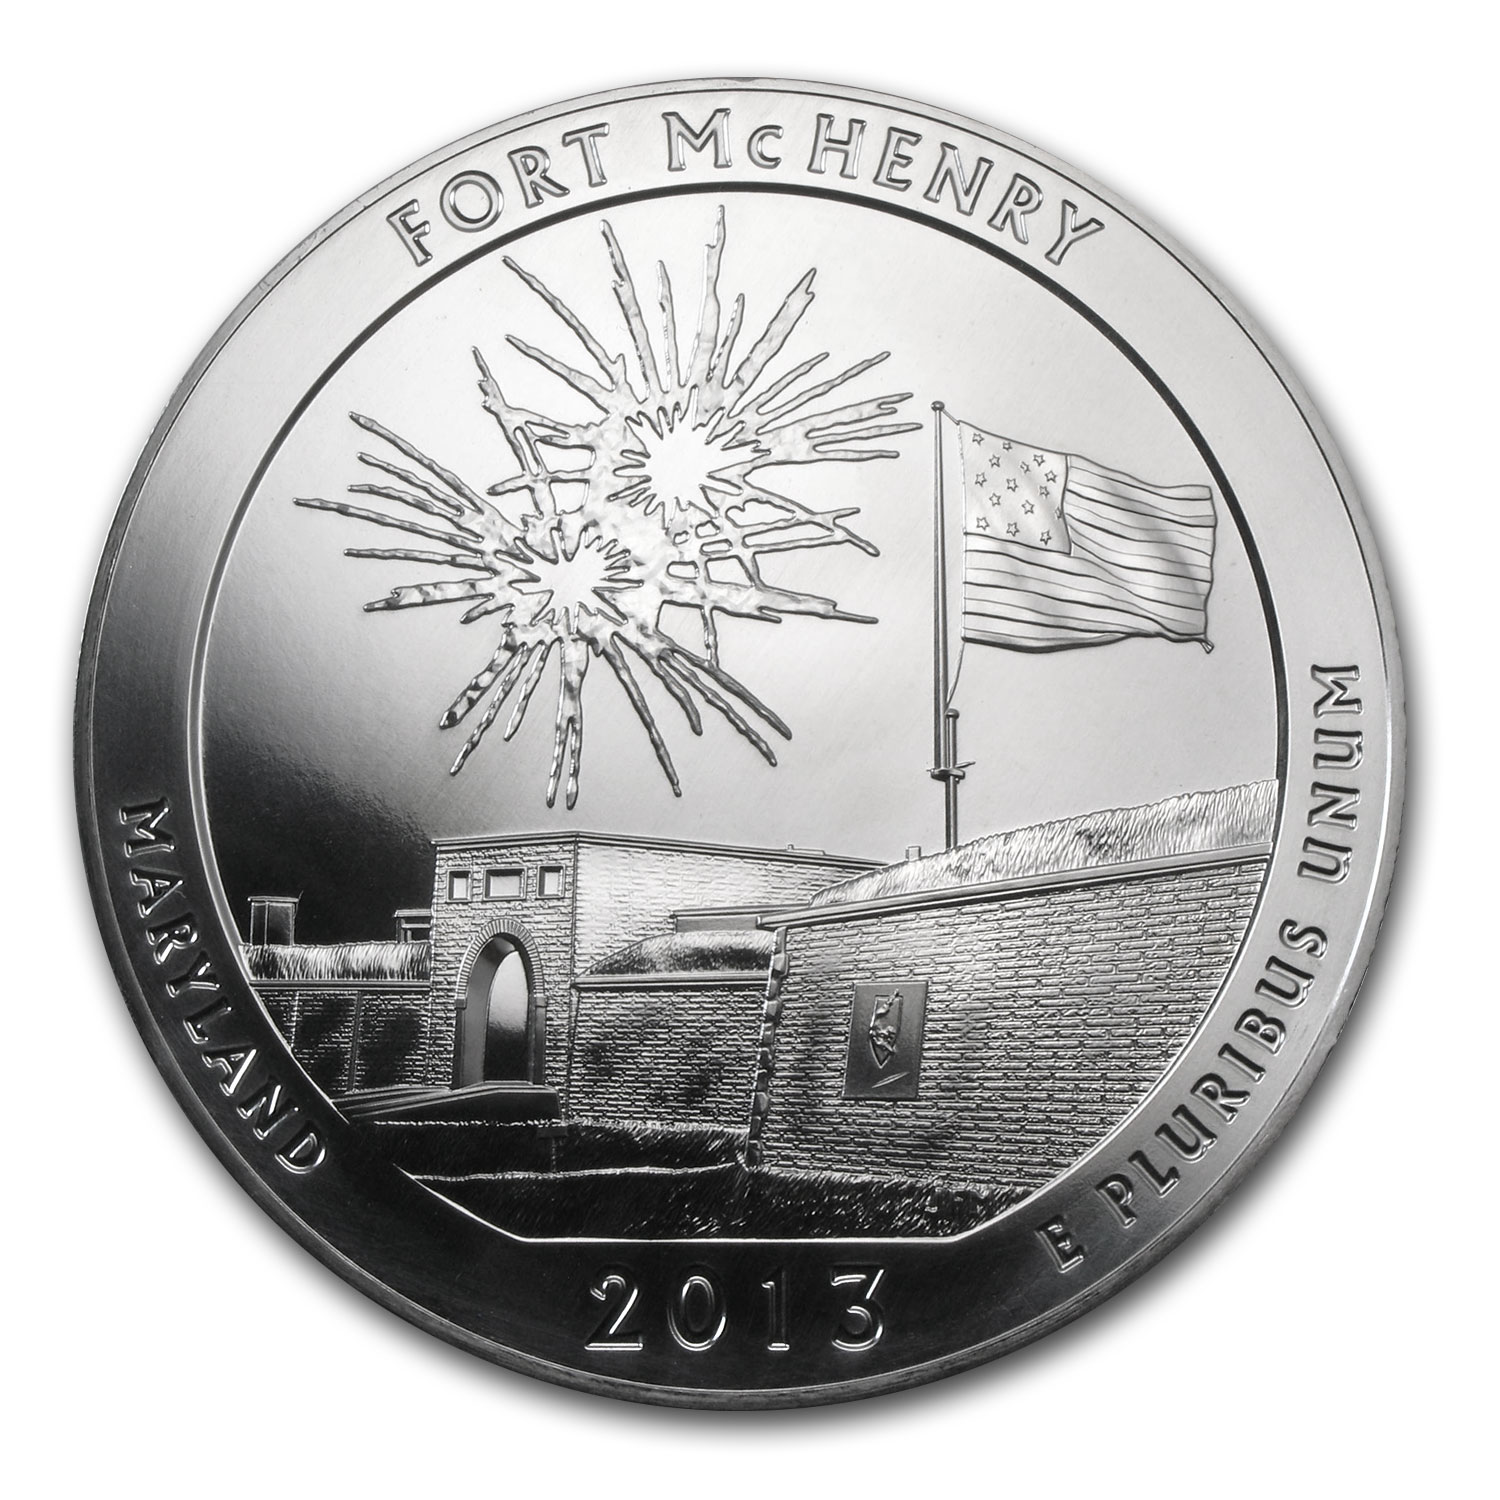 Buy 2013 5 oz Silver ATB Fort McHenry National Park, MD